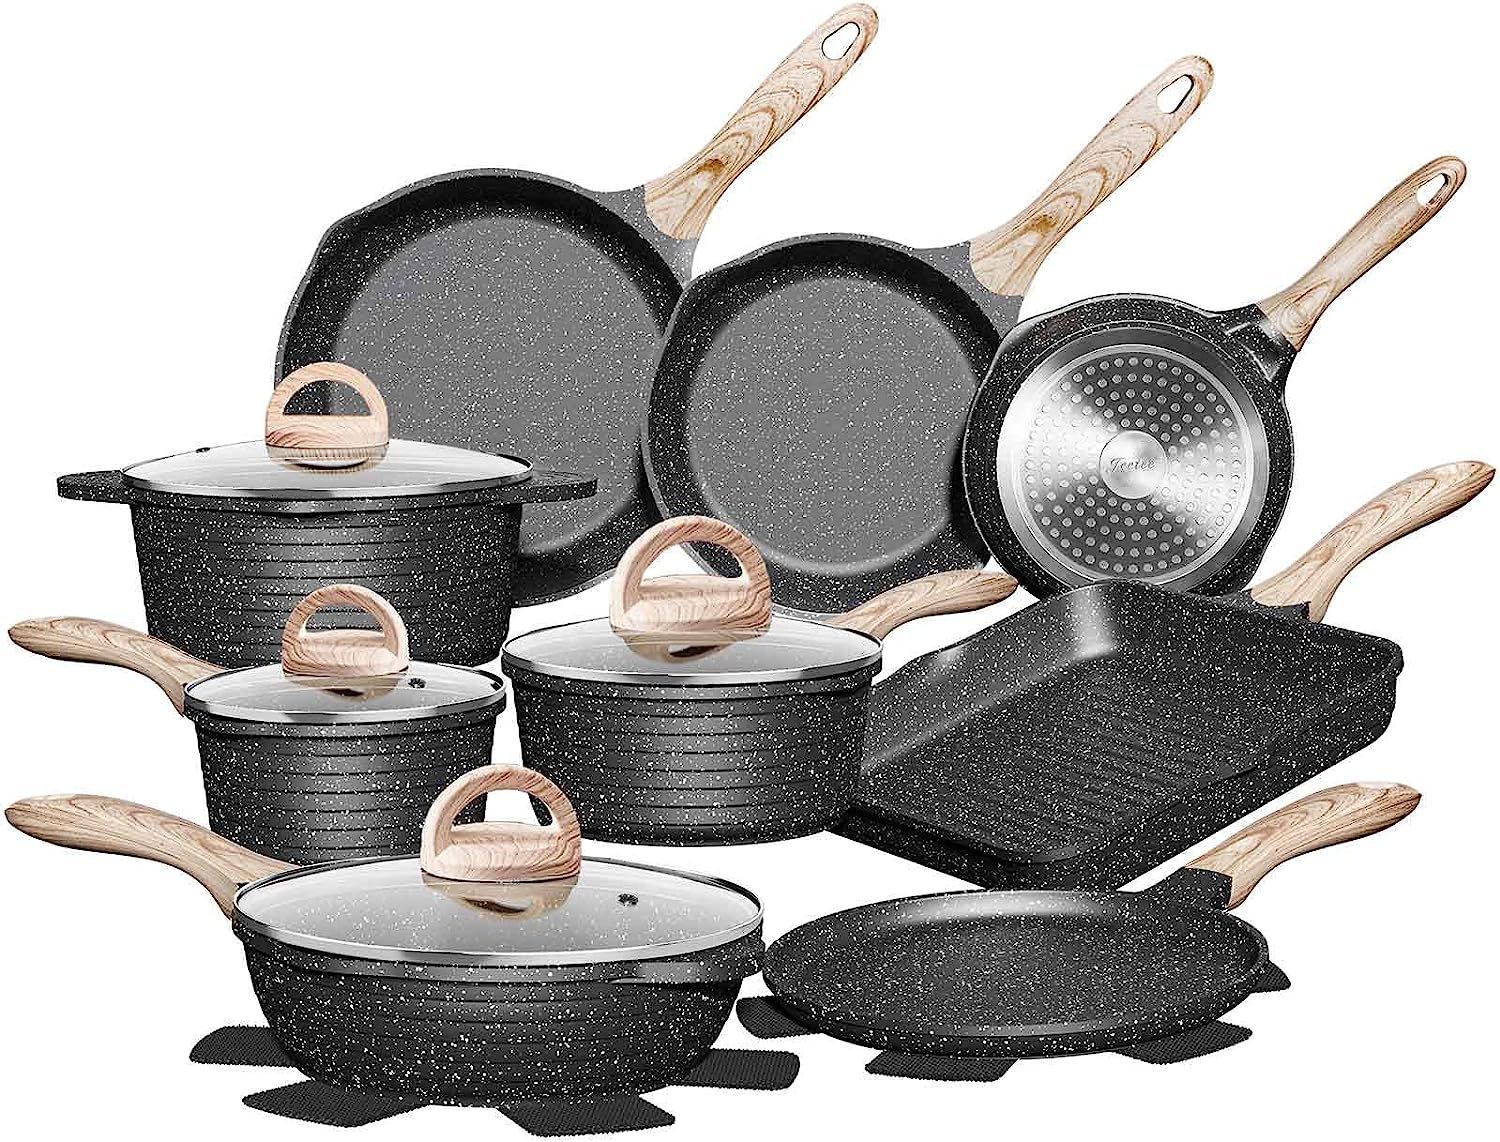 JEETEE Pots and Pans Set Nonstick 